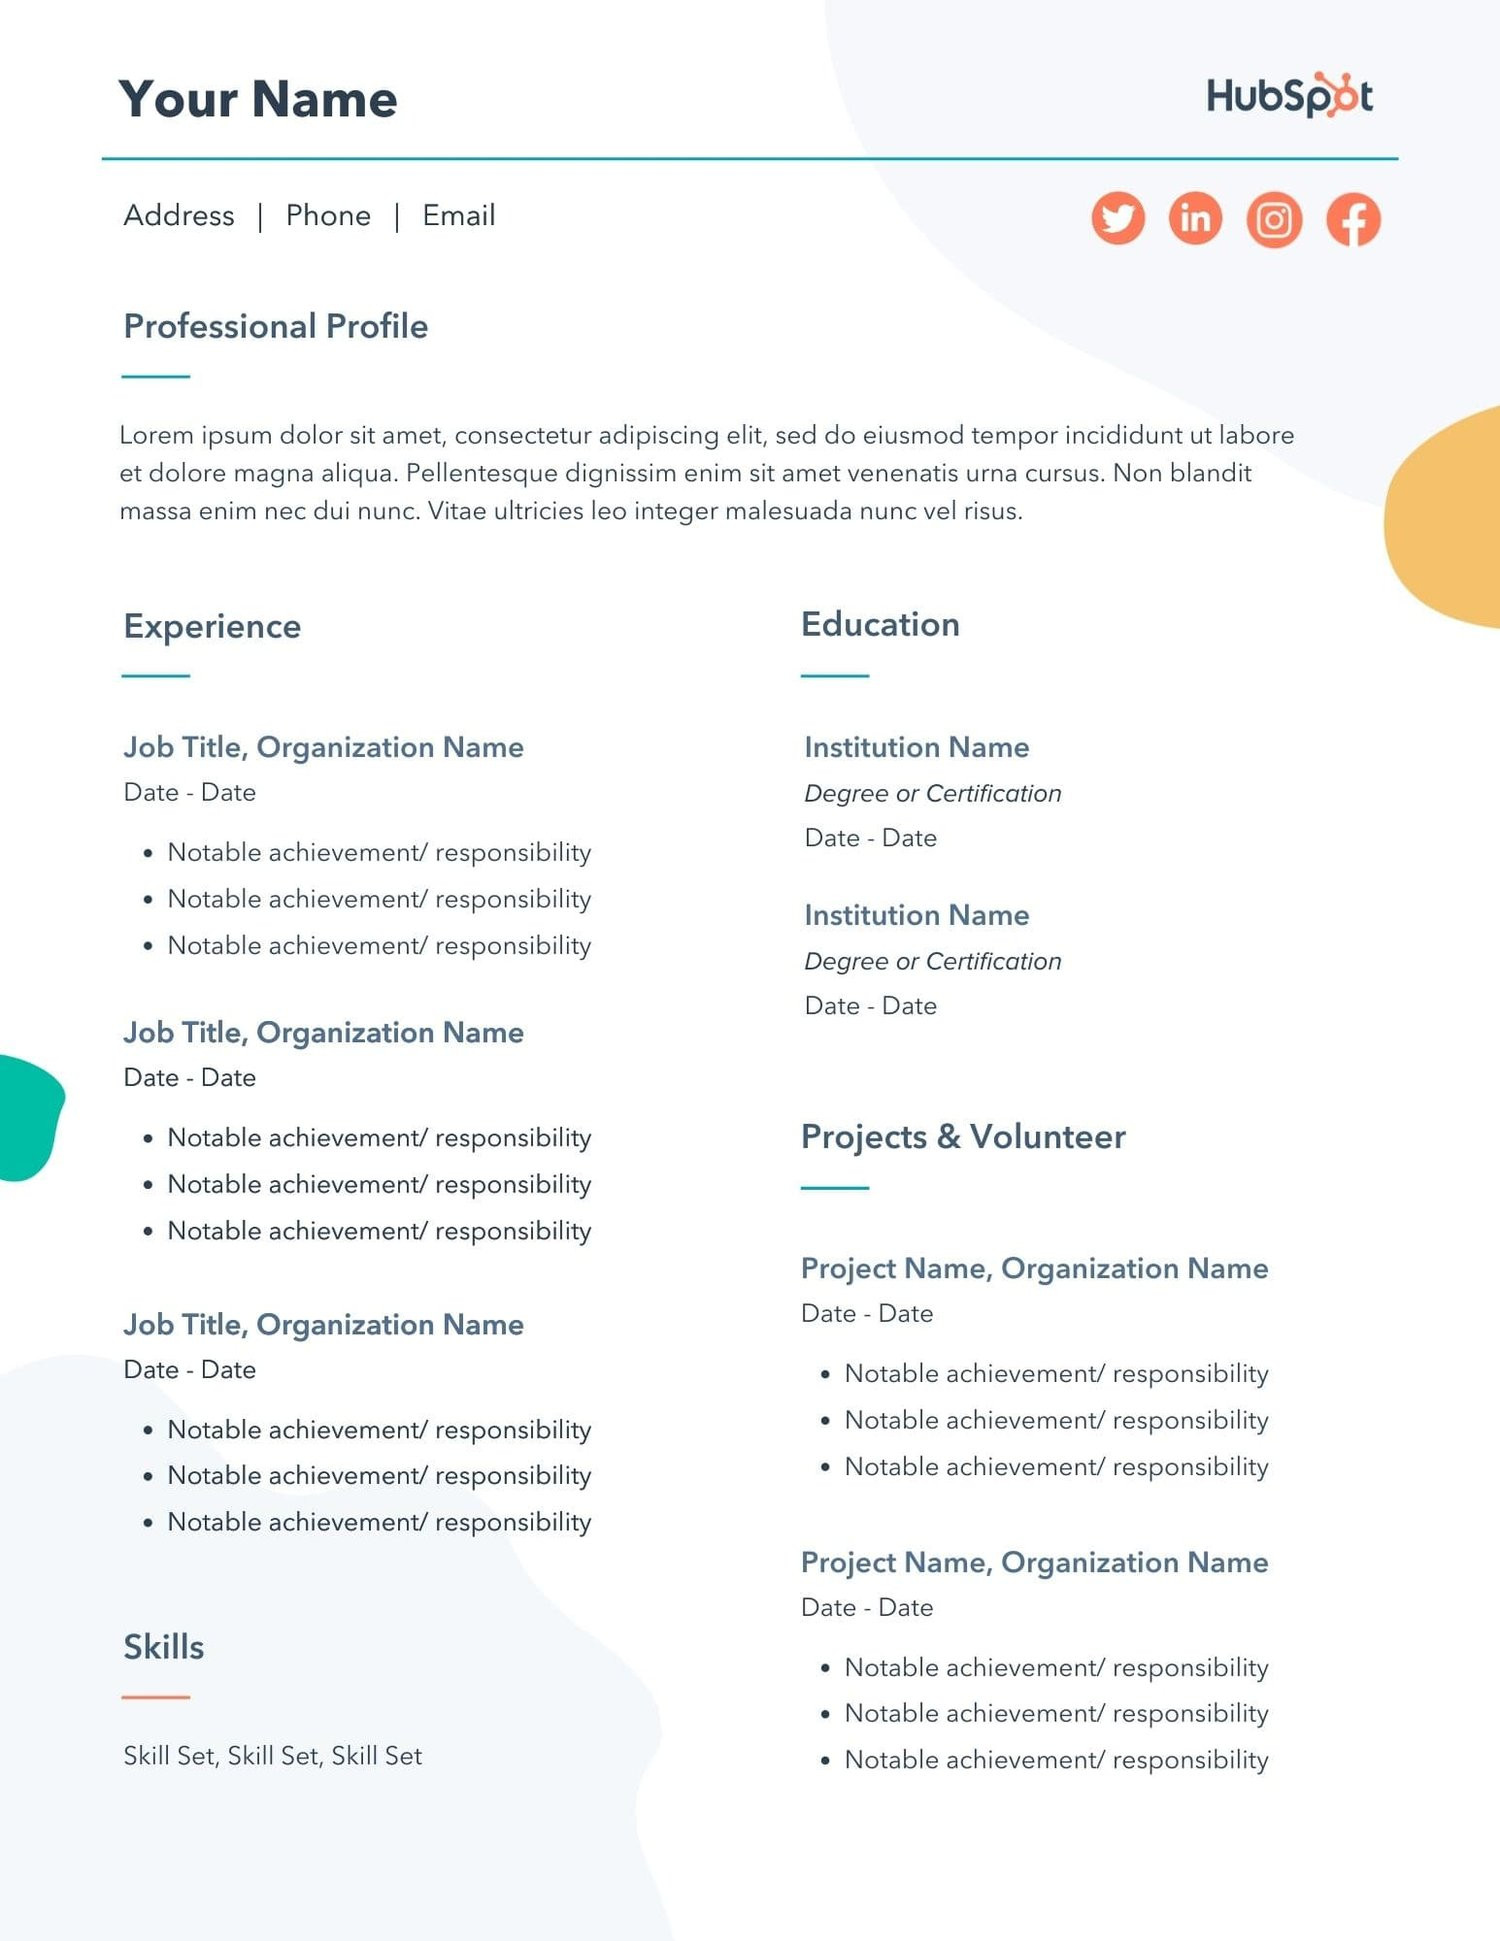 Sample Resume Funny Twitter Bio Examples 29 Free Resume Templates for Microsoft Word (& How to Make Your Own)